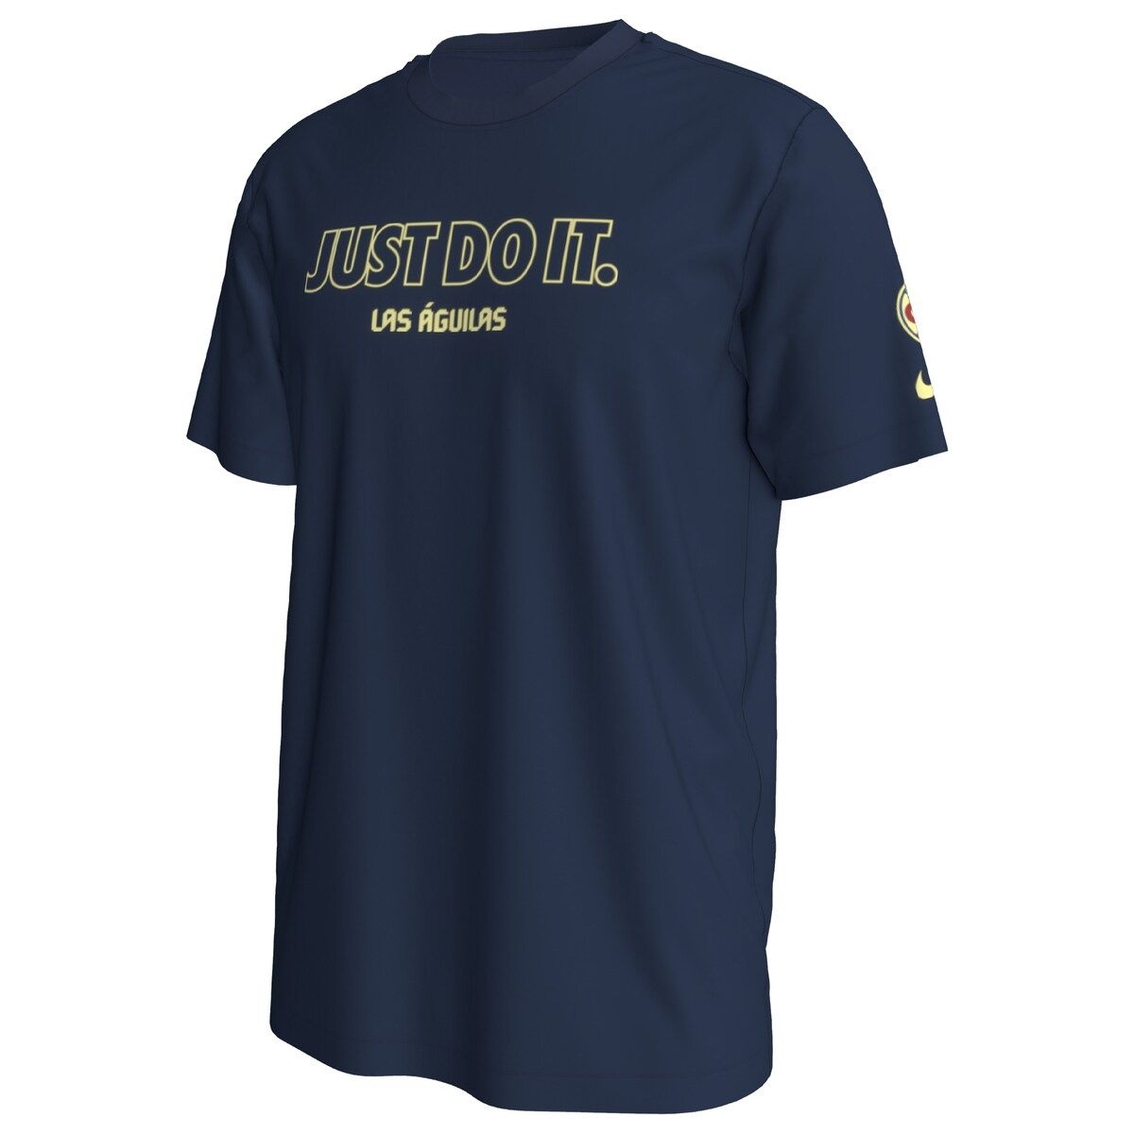 Nike Men's Navy Club America Just Do It T-Shirt - Image 3 of 4